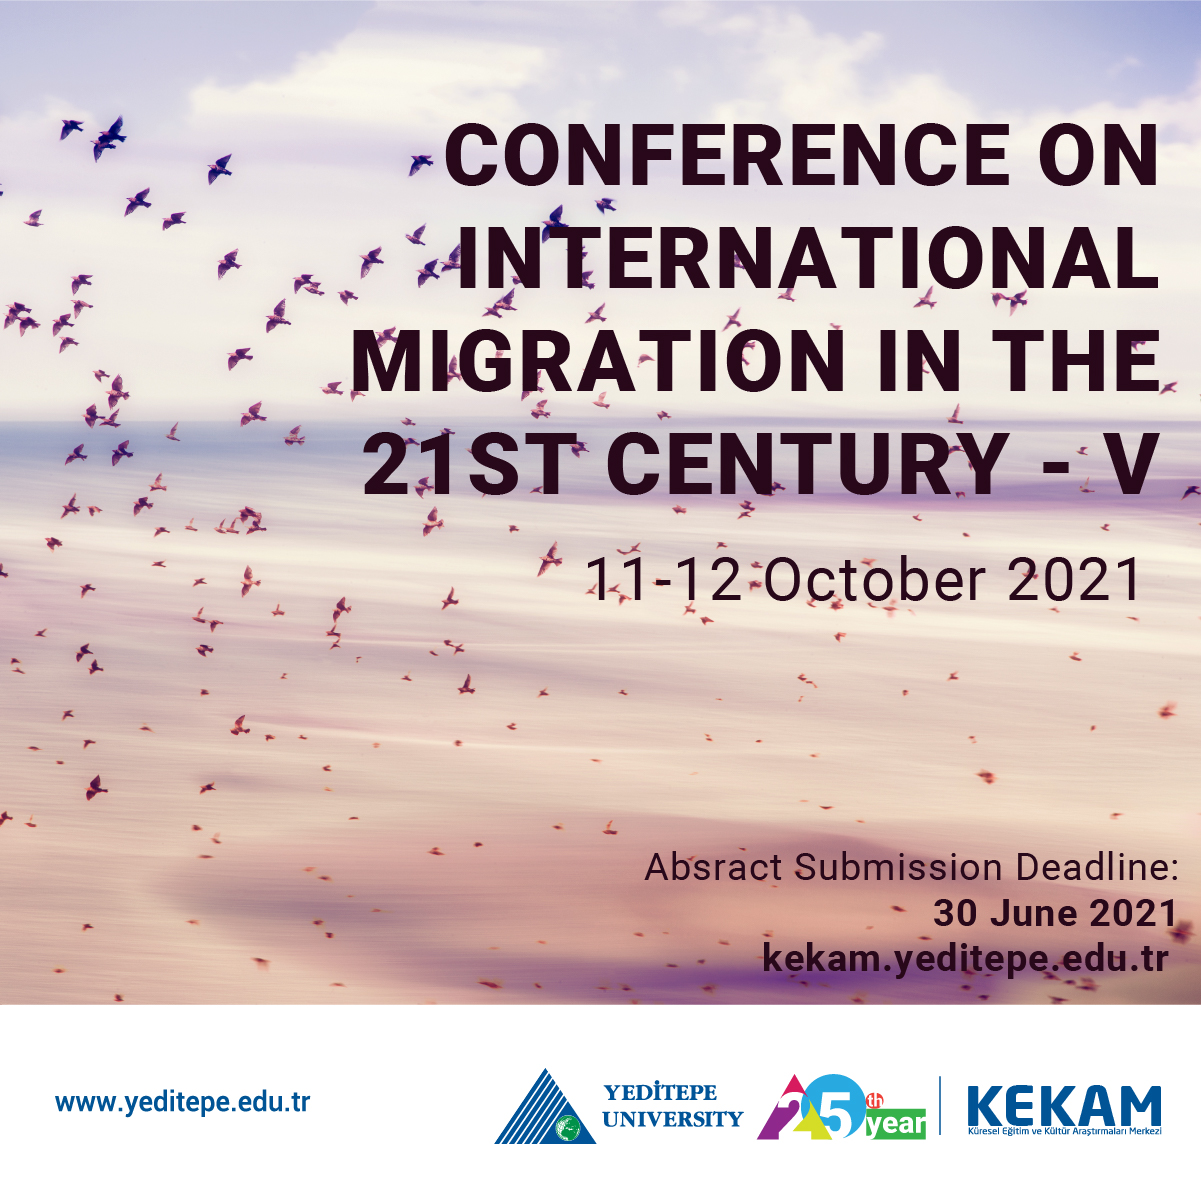 Conference on International Migration in the 21st Century - V